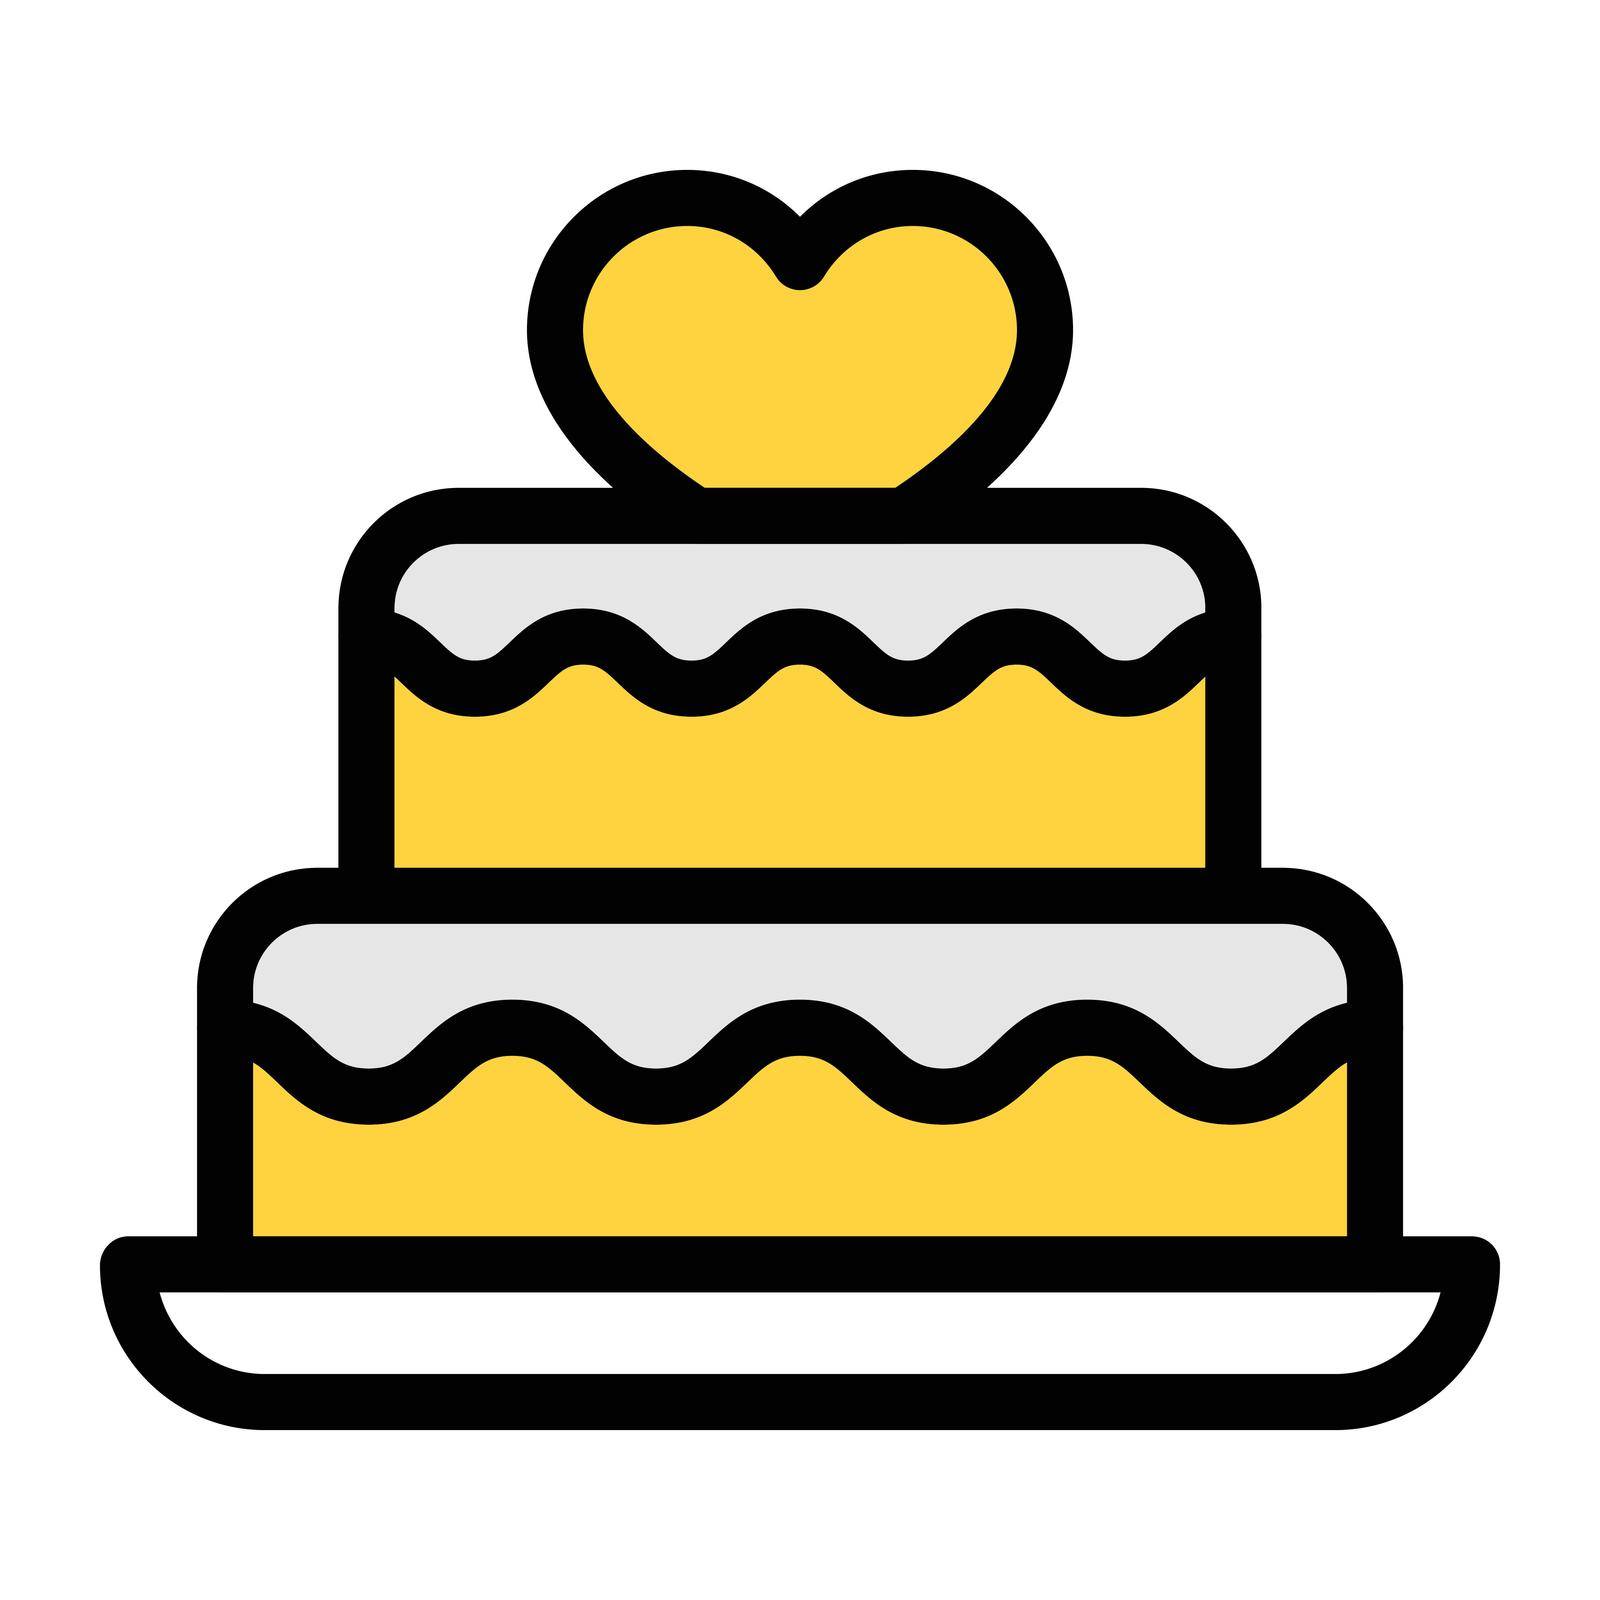 cake Vector illustration on a transparent background. Premium quality symbols. Stroke vector icon for concept and graphic design